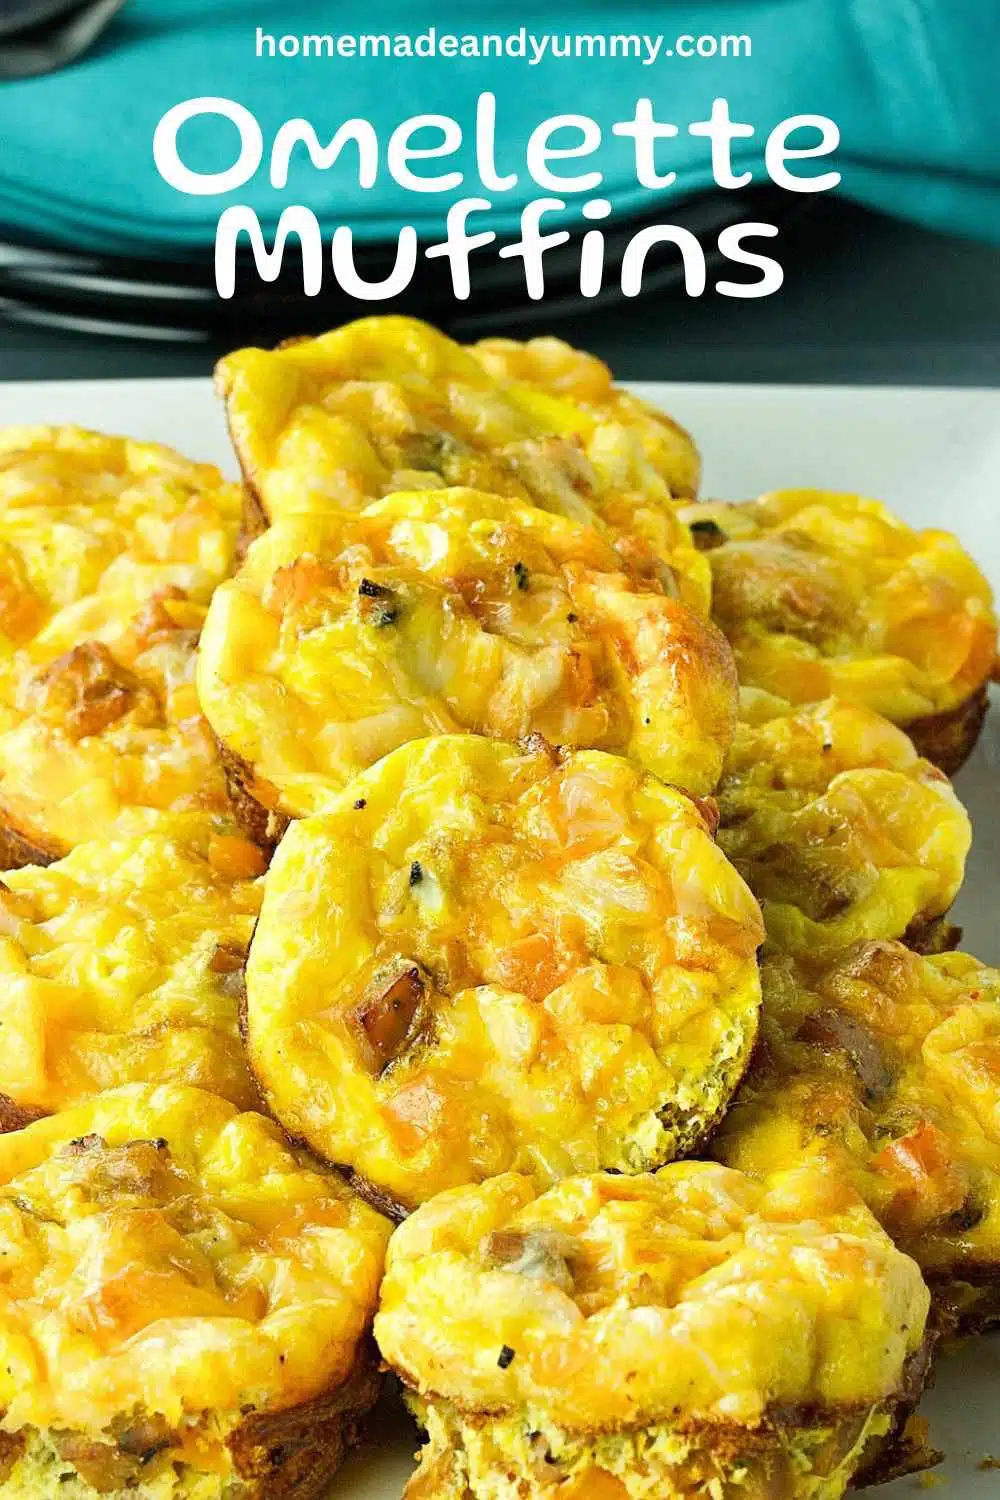 Omelette muffins ready to eat.